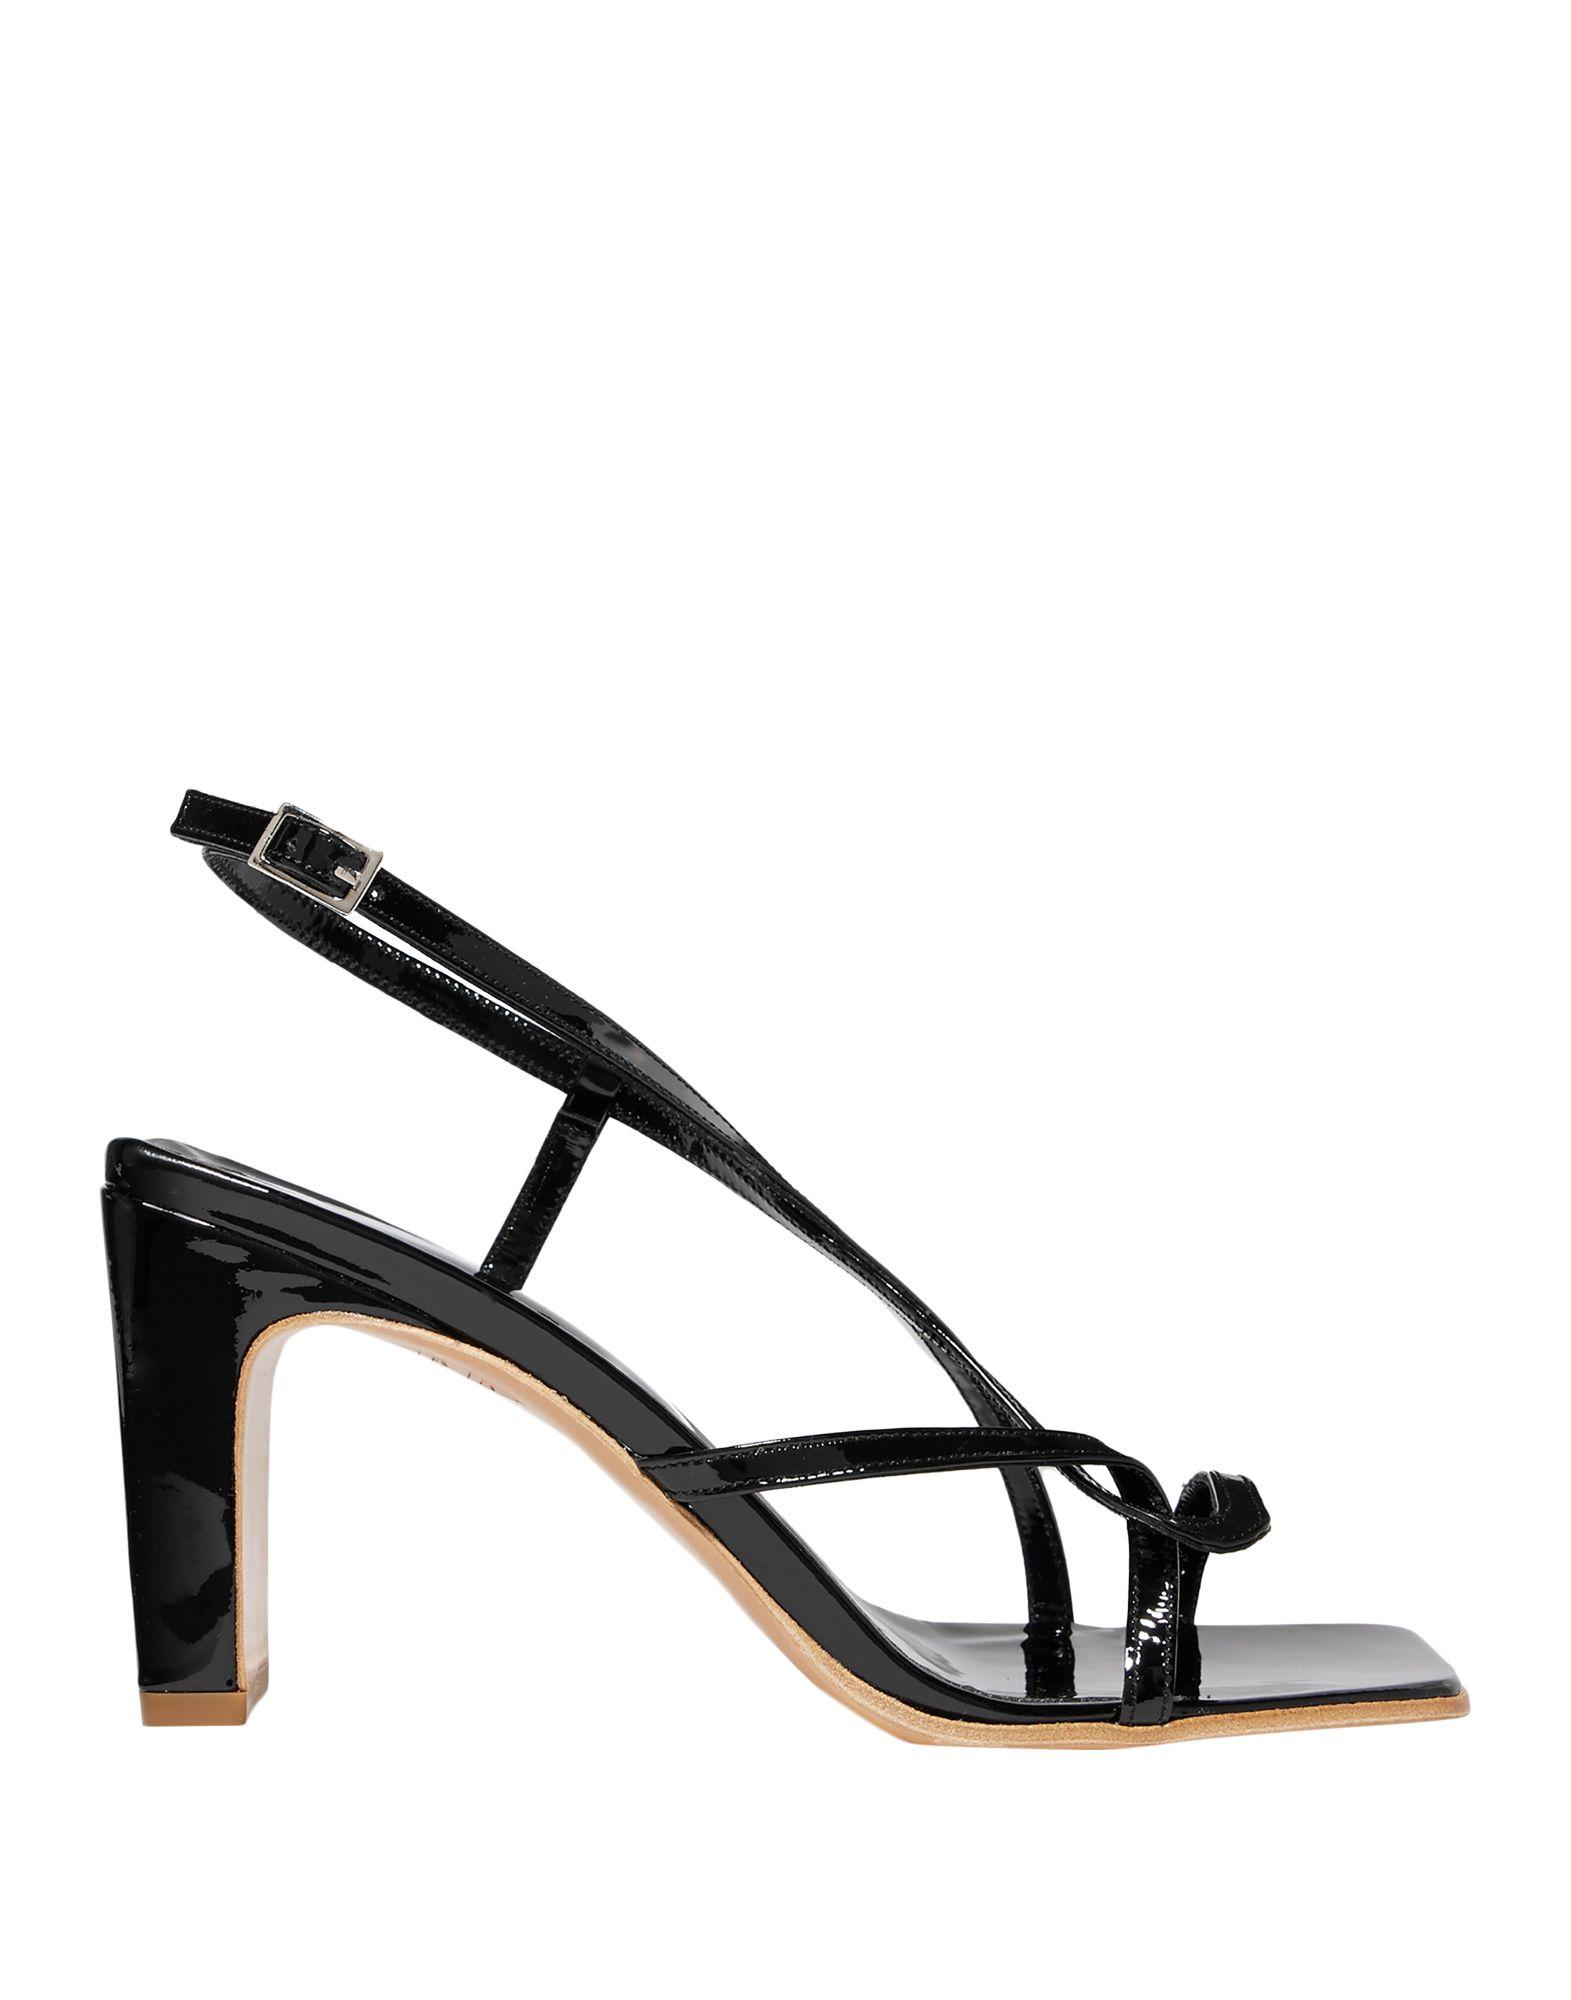 BY FAR Carrie Patent-leather Slingback Sandals in Black - Lyst